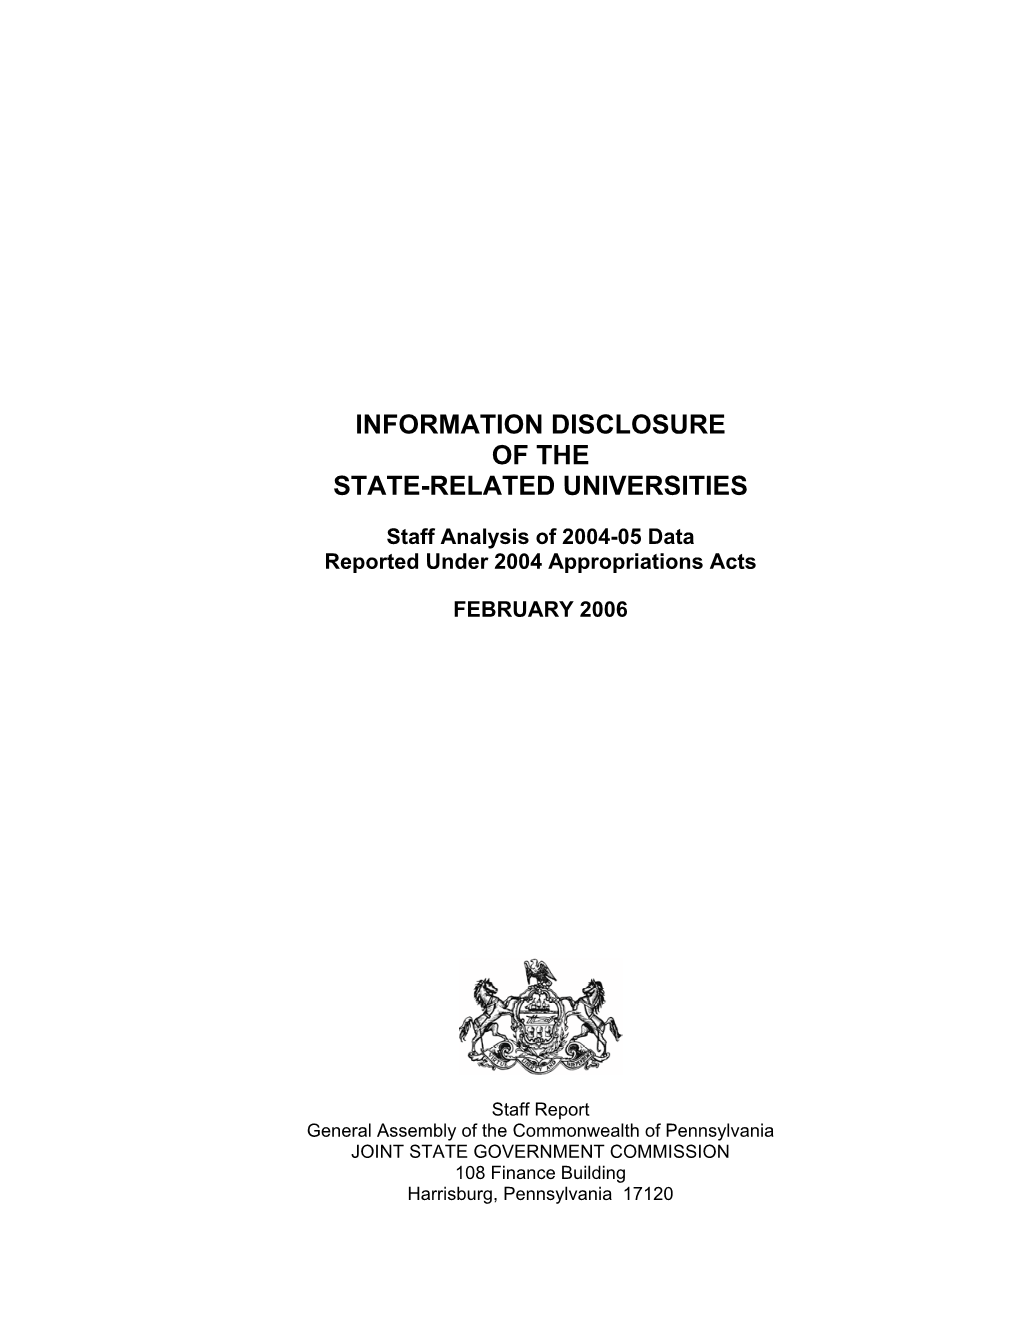 Information Disclosure of the State-Related Universities